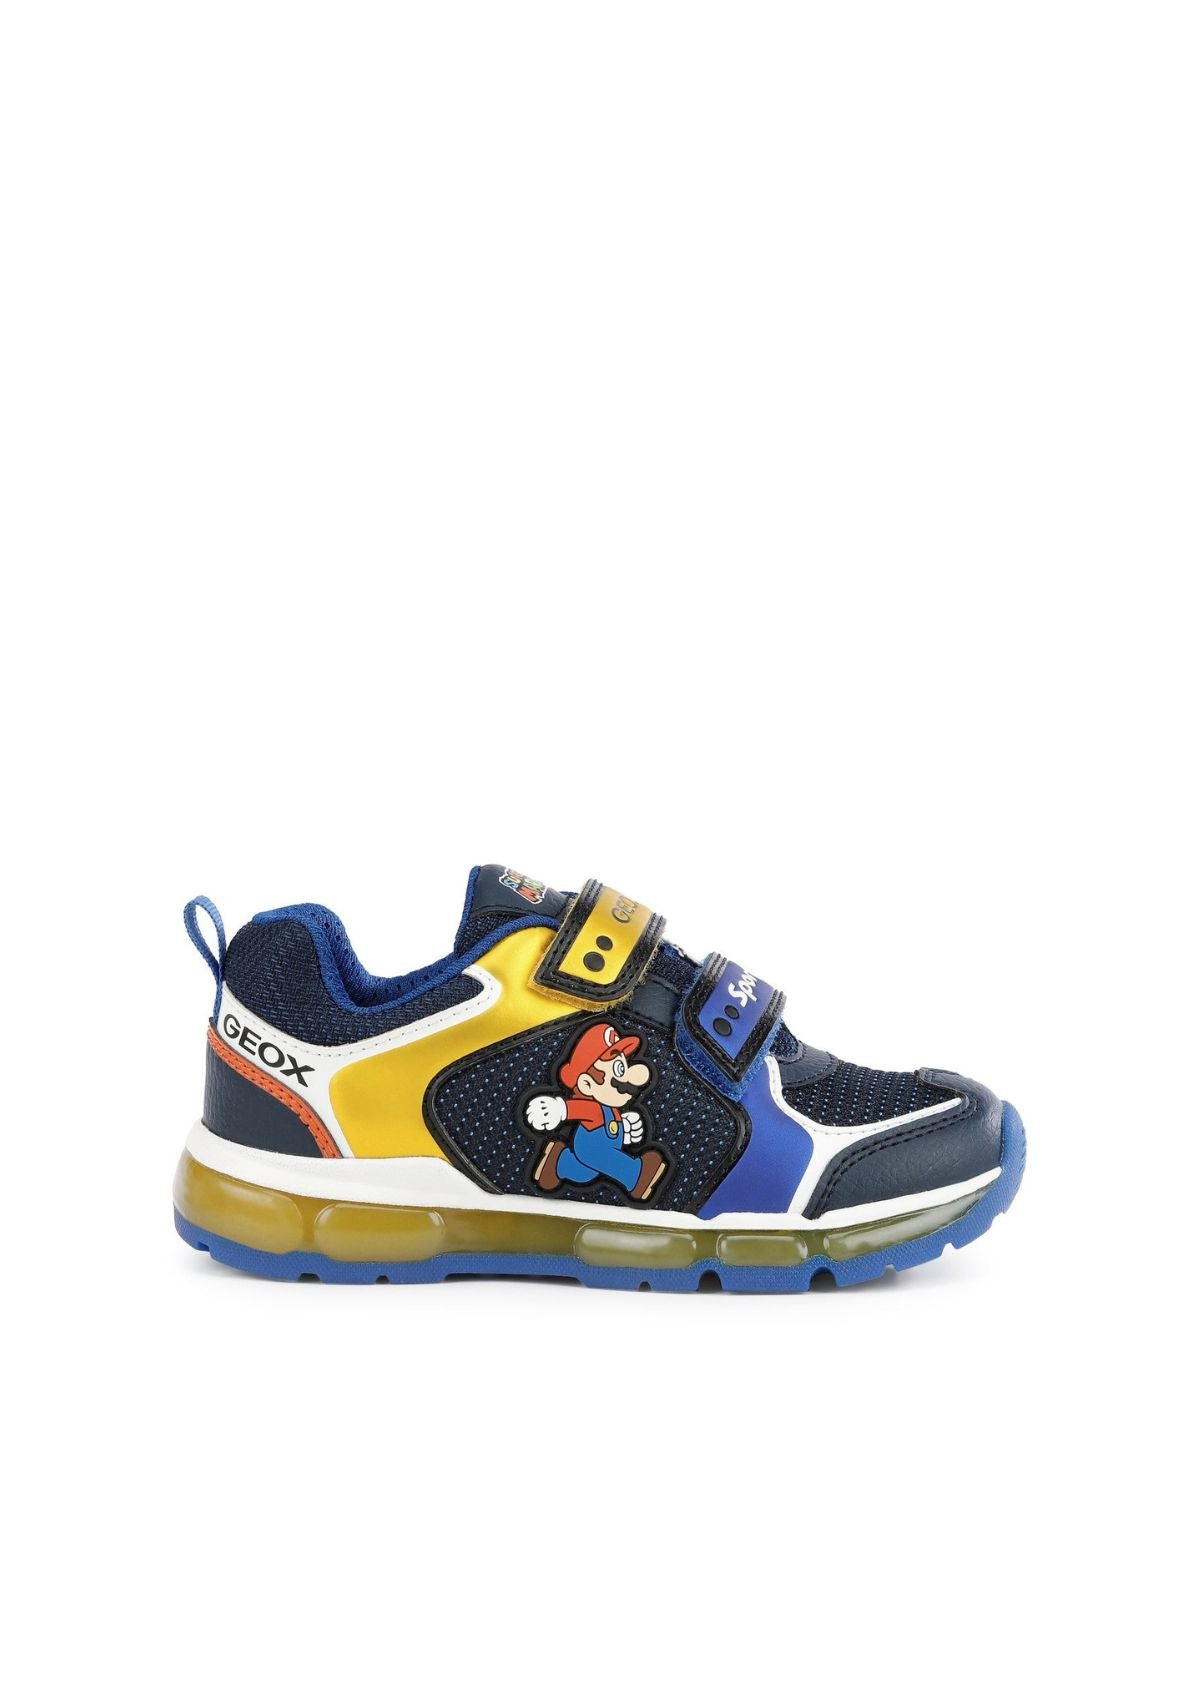 Geox Boy ANDROID Mario Royal Yellow side